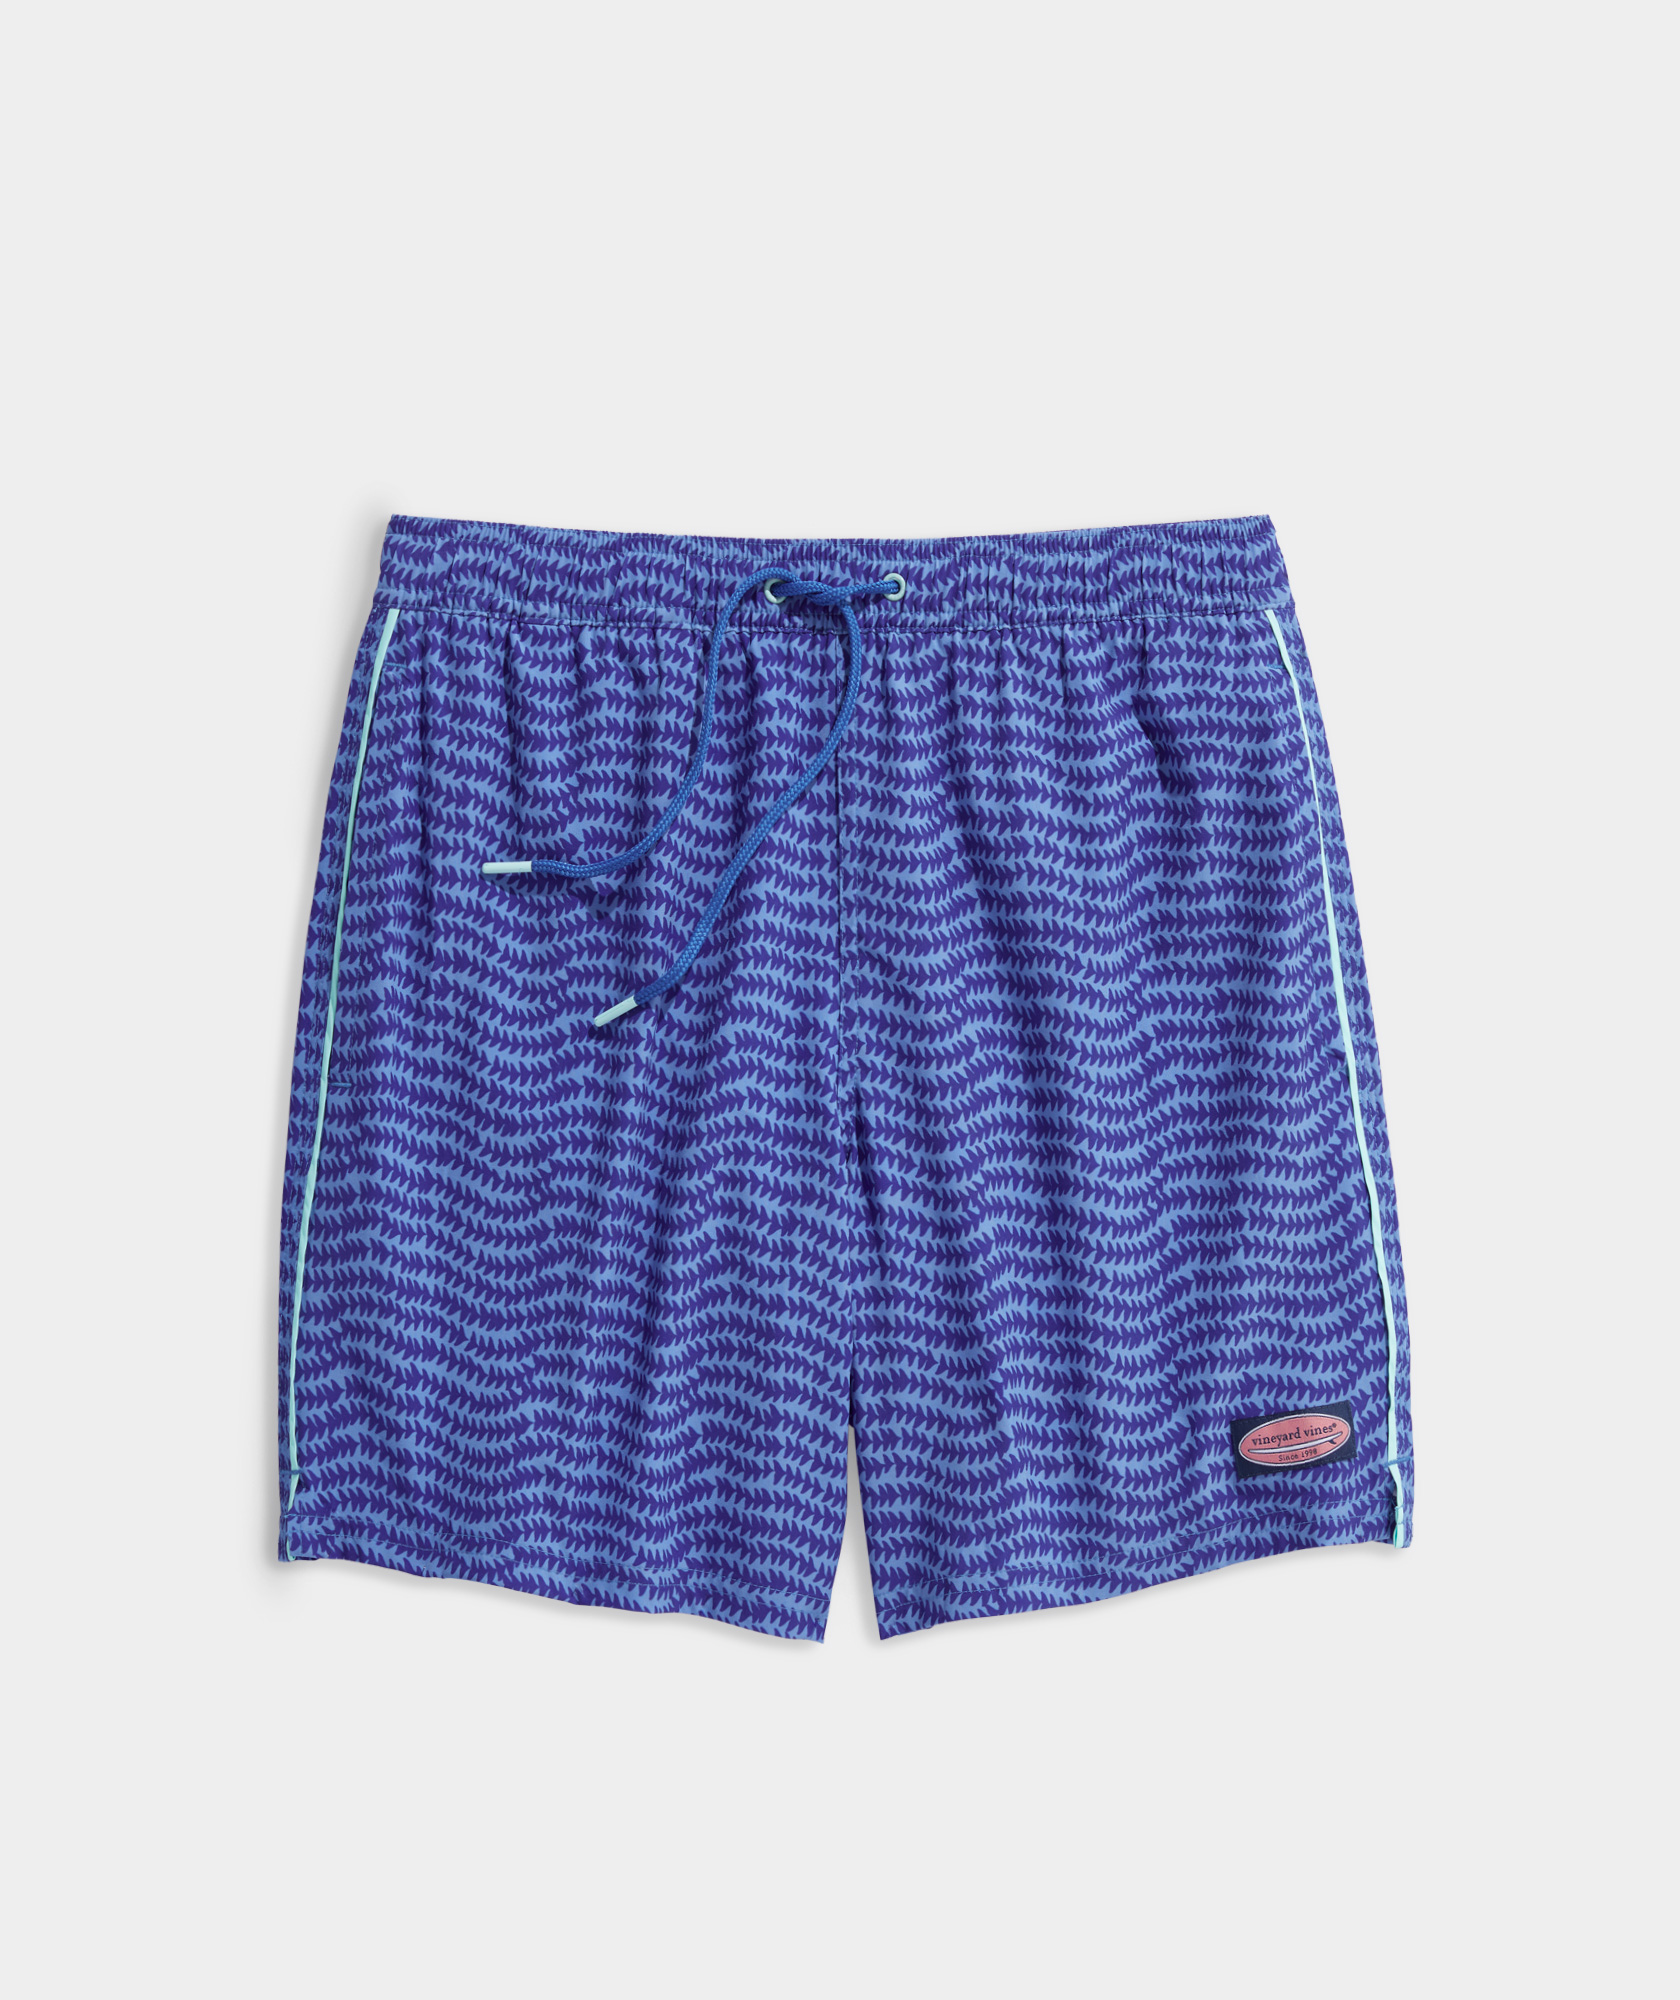 Shop 7 Inch Chappy Trunk at vineyard vines